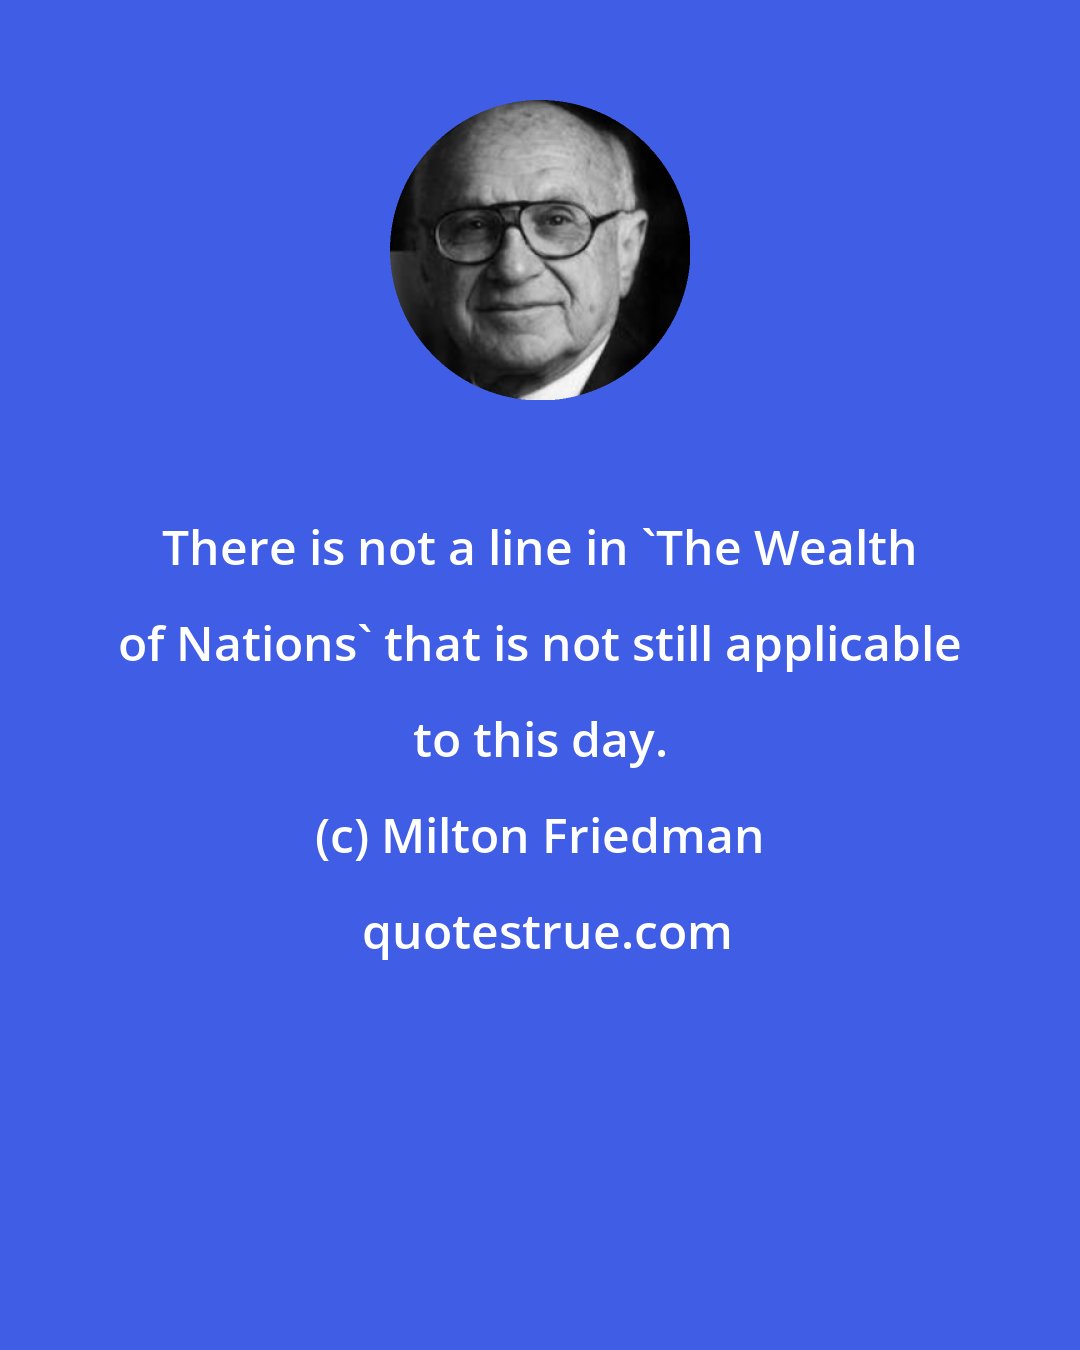 Milton Friedman: There is not a line in 'The Wealth of Nations' that is not still applicable to this day.